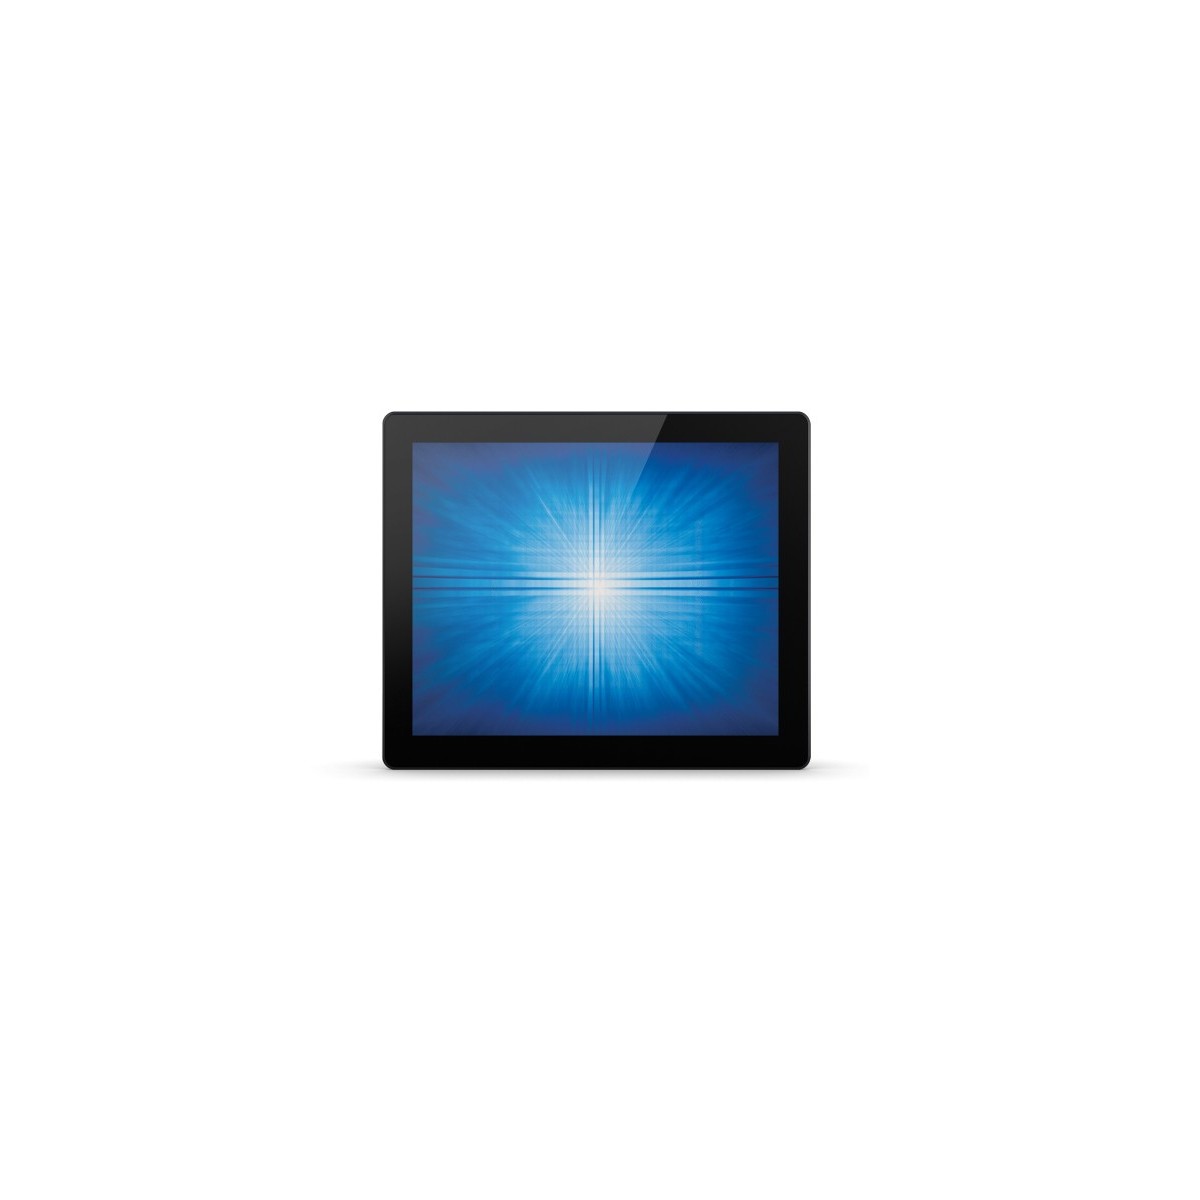 Elo Touch Solutions Elo Touch Solution 1790L - 43.2 cm (17) - 220 cd-m² - LCD-TFT - 5 ms - 800:1 - 1280 x 1024 pixels